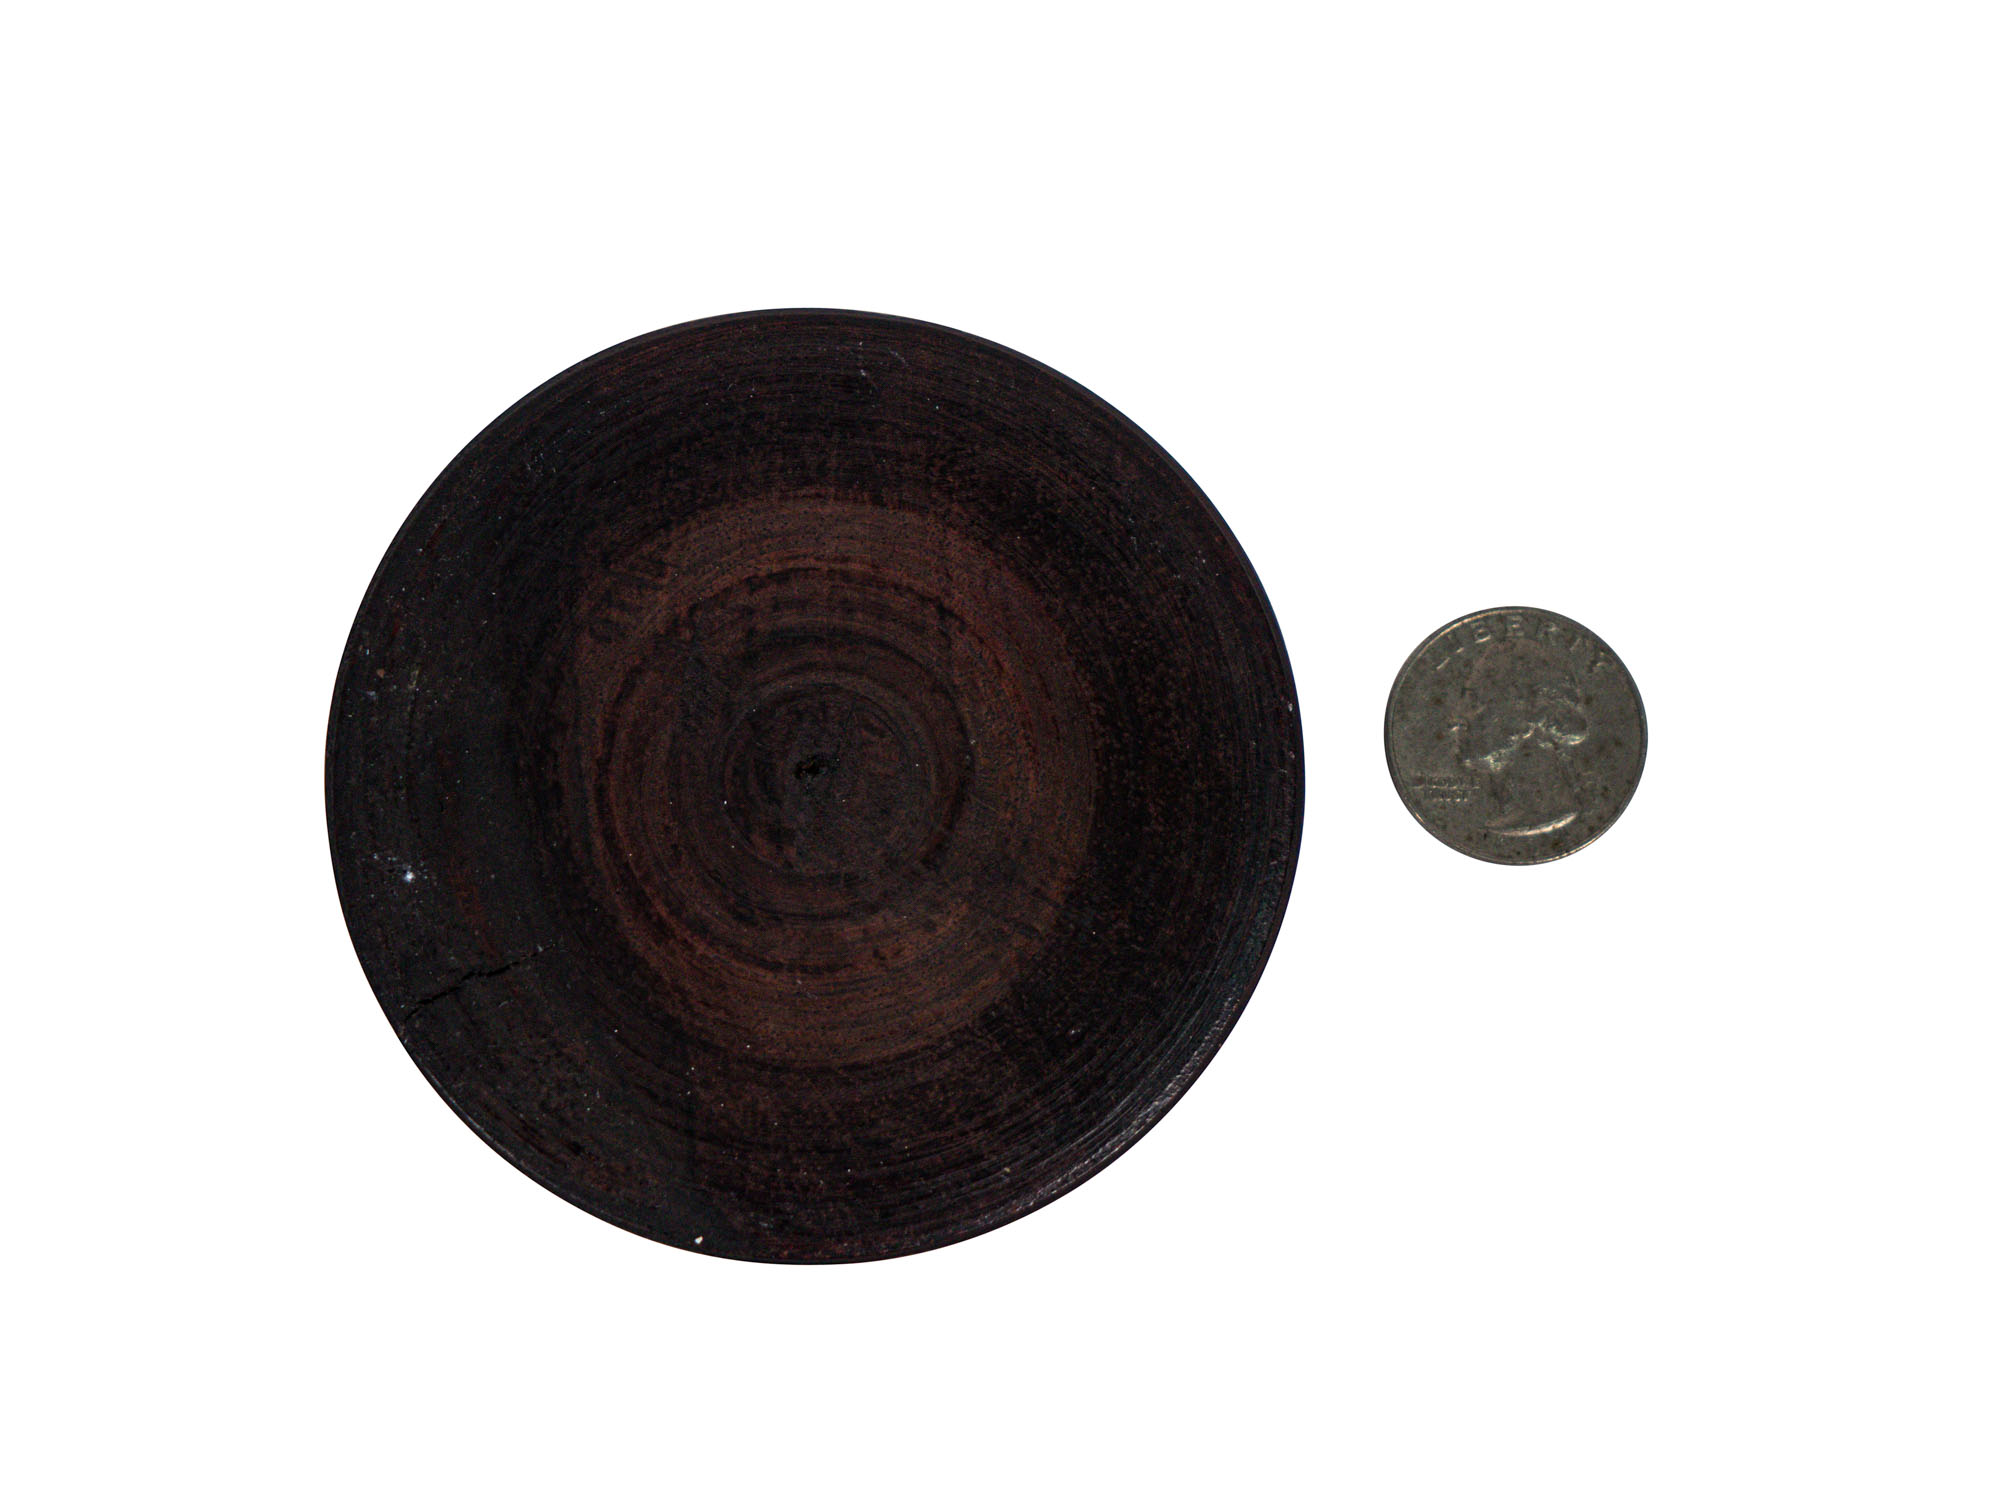 Elephant African Wood Coasters (set of 6): Gallery Item - 865-50-E-G4998 (Q4)